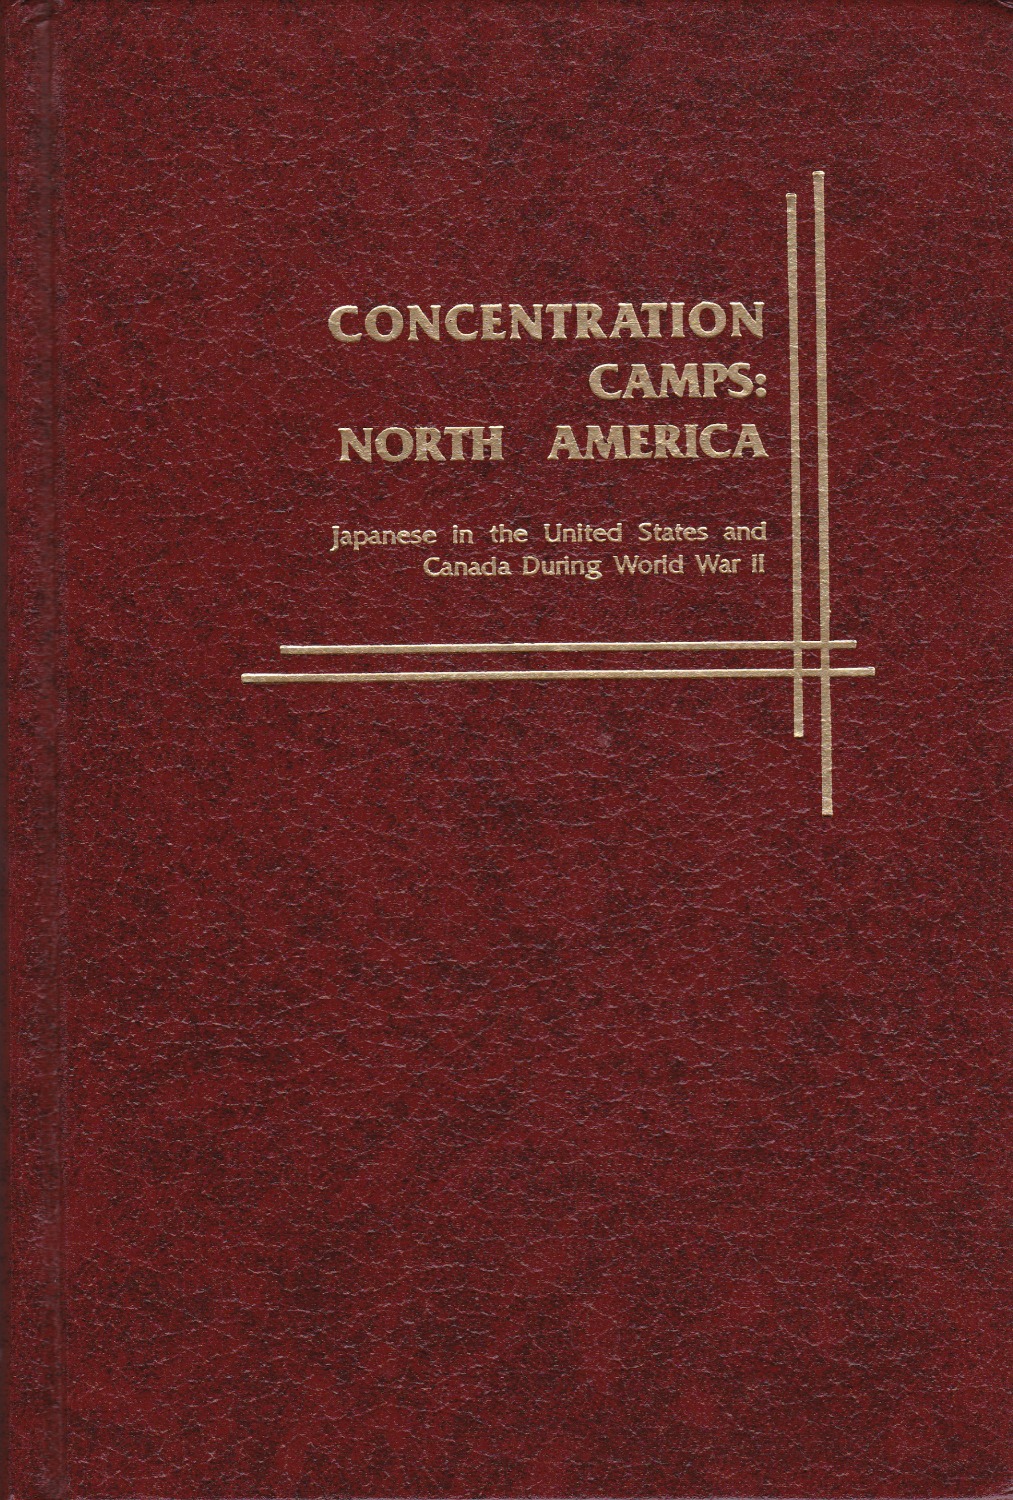 Concentration camps, North America : Japanese in the United States and Canada during World War II.